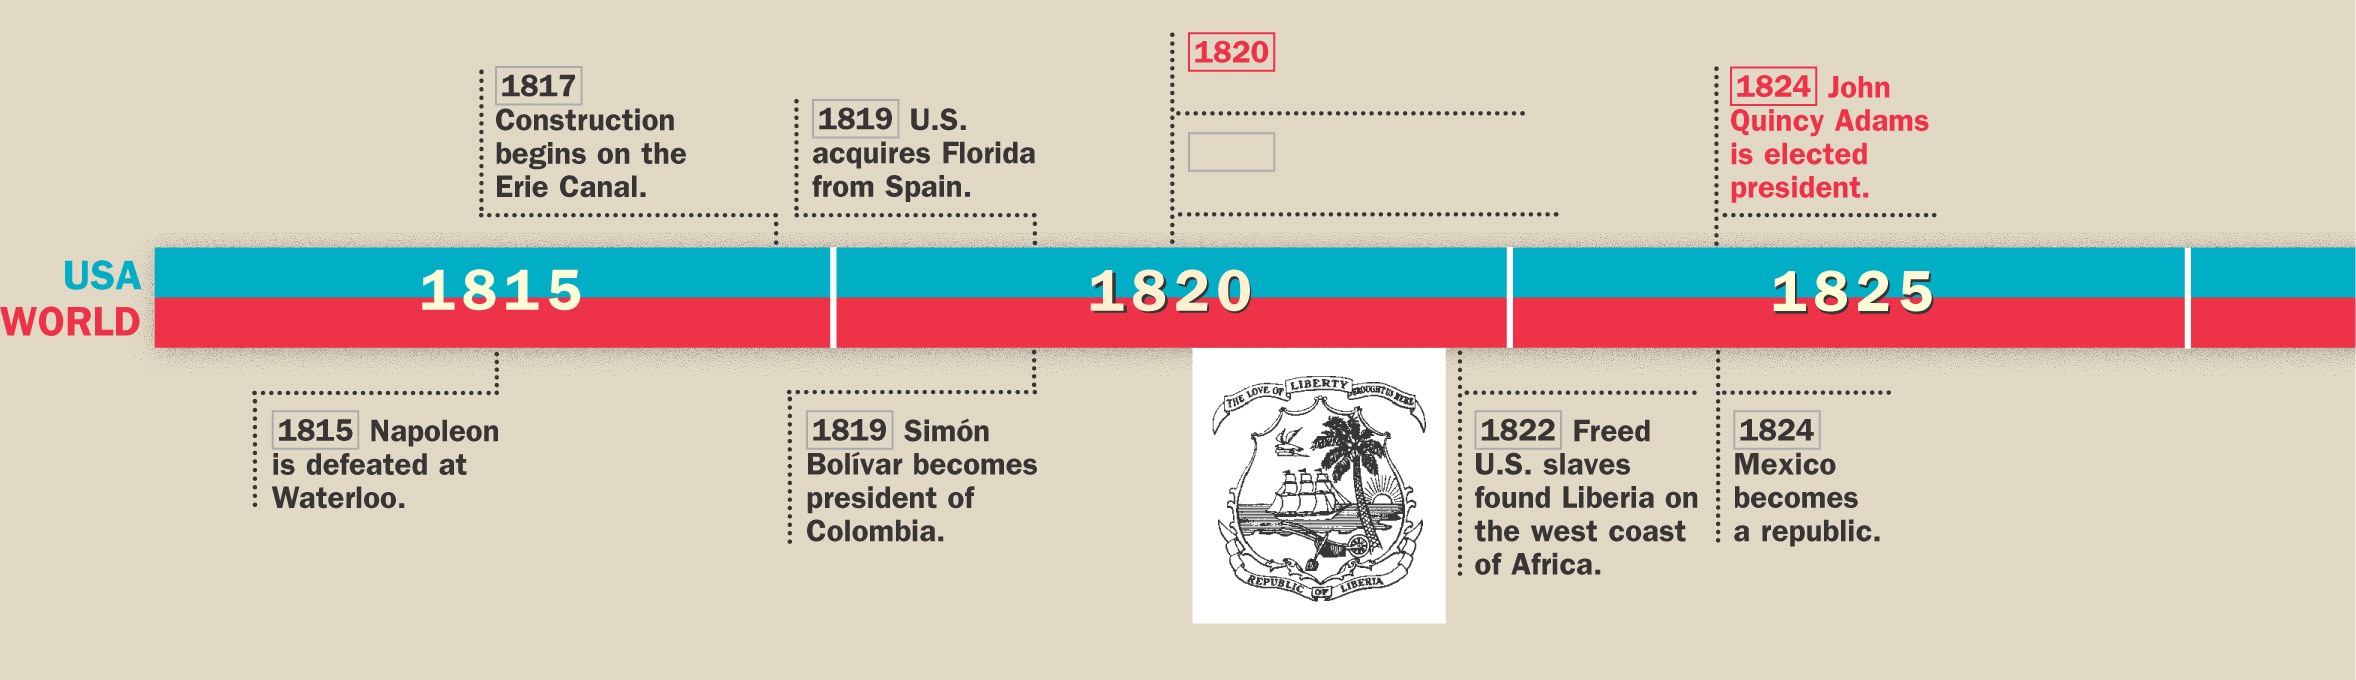 A timeline of historical events from 1815 to 1840 in both the U.S. and the world